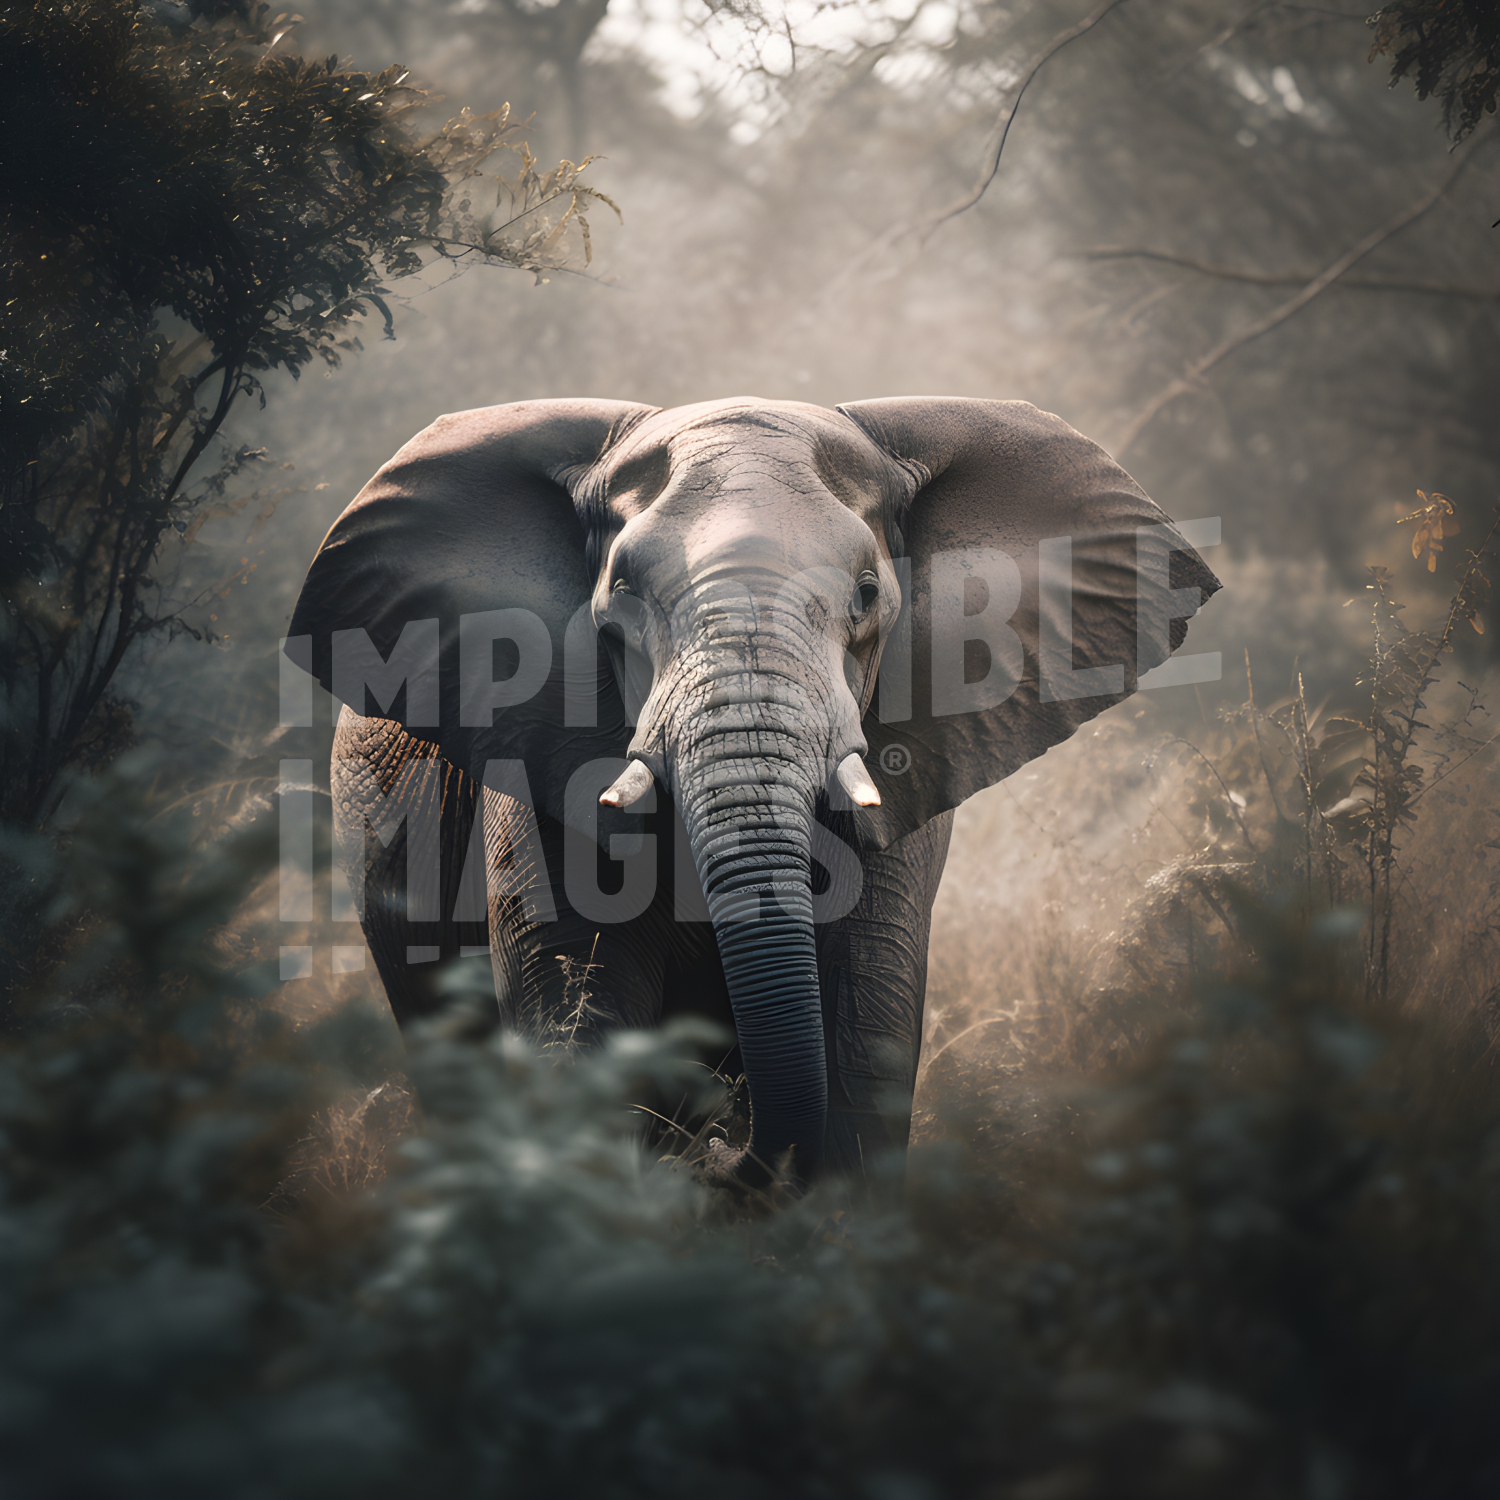 An elephant standing in the middle of a forest